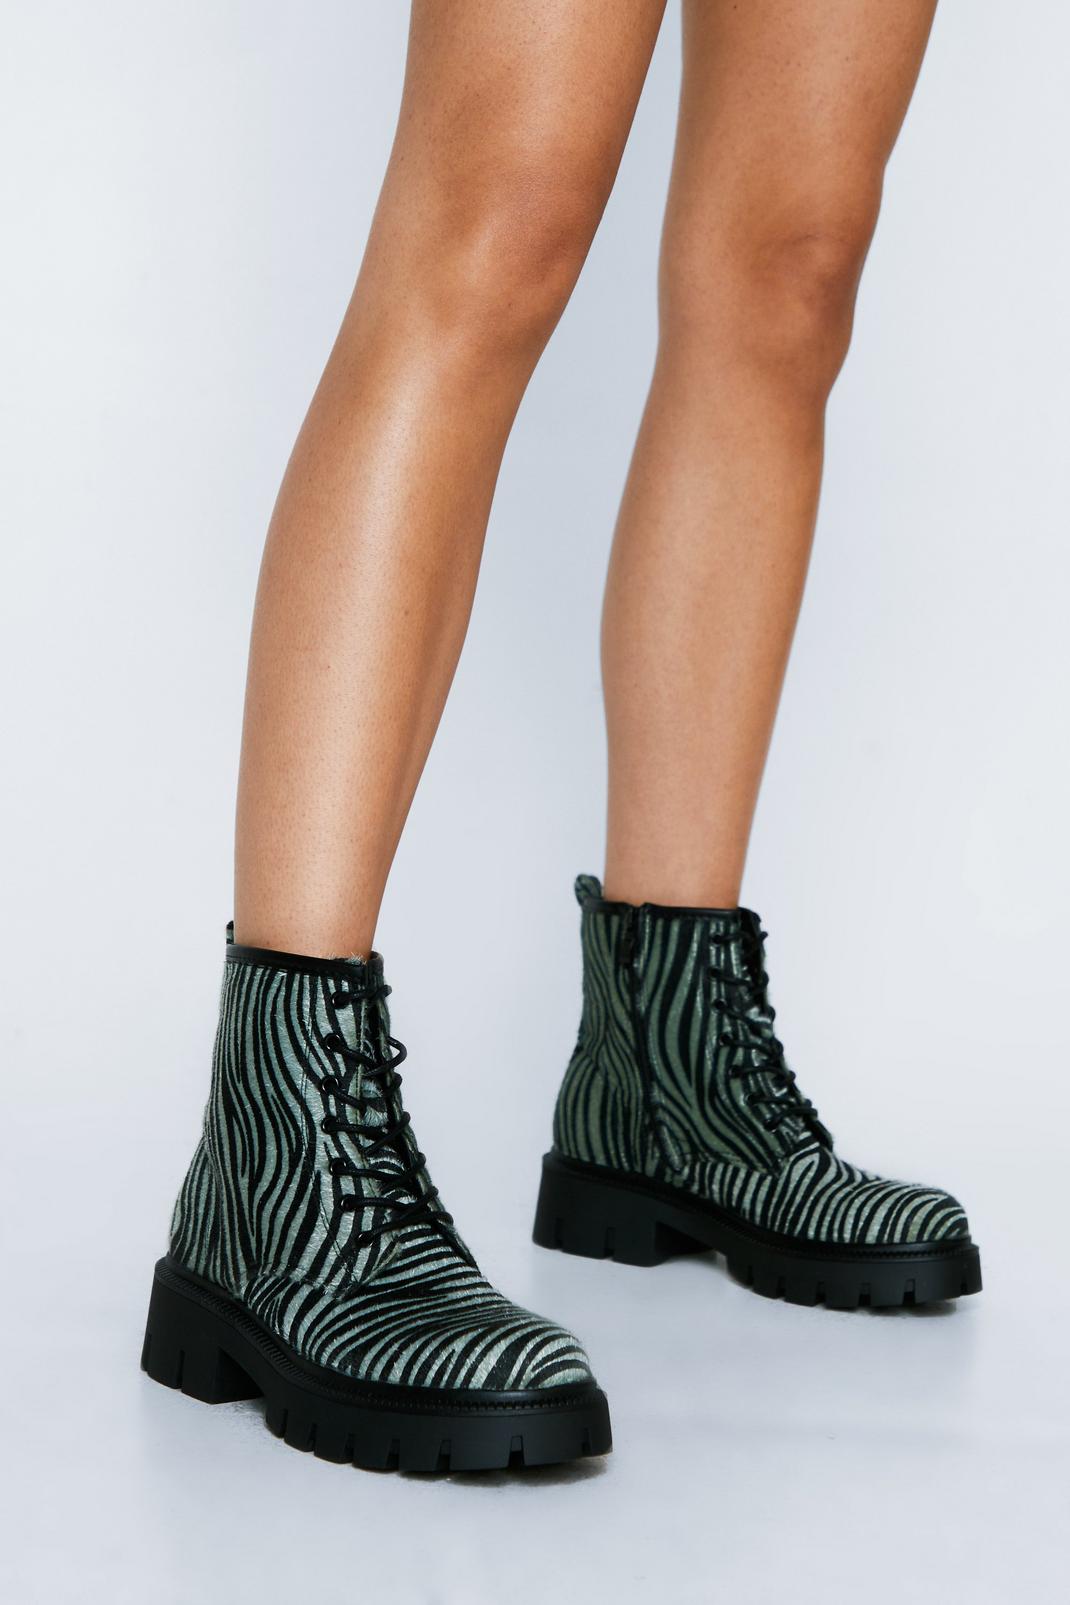 Sage Metallic Calf High Lace Up Hiker Boots image number 1